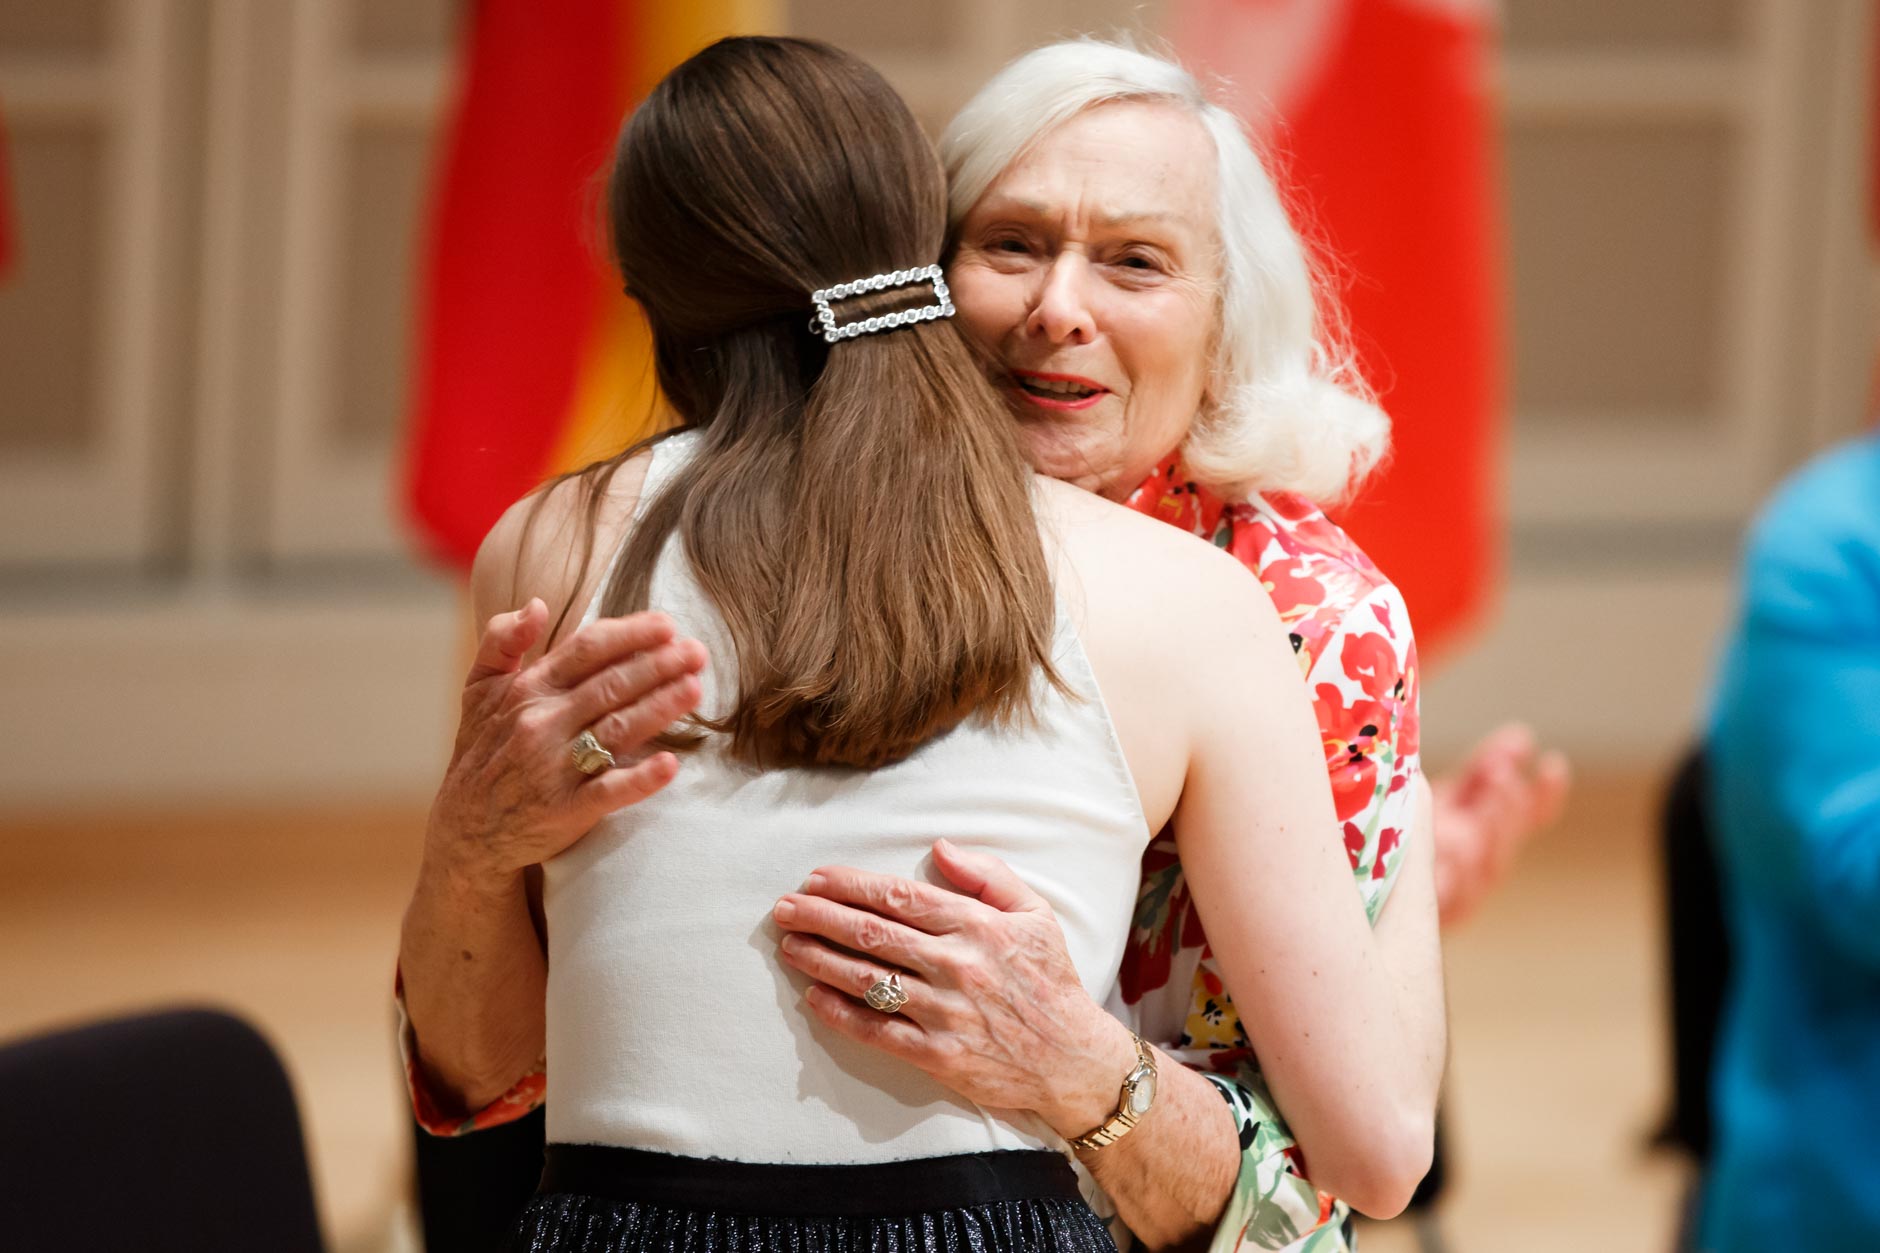 USA International Harp Competition Founder and Artistic Director Susann McDonald hugs Executive Director Erin Brooker-Miller during the opening ceremony of the 11th USA International Harp Competition at Indiana University in Bloomington, Indiana on Wednesday, July 3, 2019. (Photo by James Brosher)